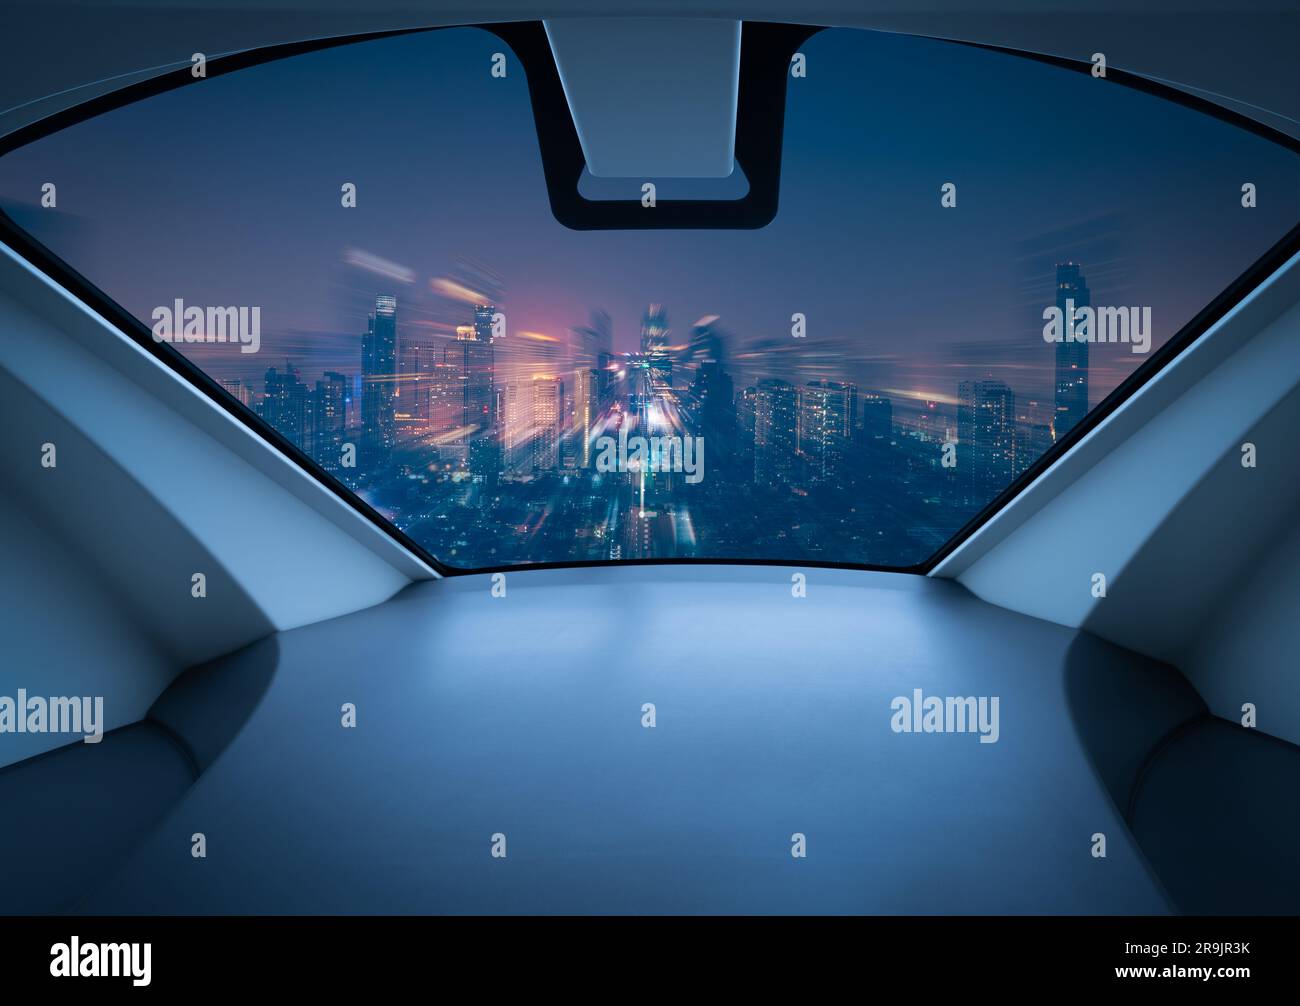 Air taxi window view of city at night. Air vehicle. Personal air transport. Autonomous aerial taxi. Flying car. Urban aviation. Futuristic technology. Stock Photo